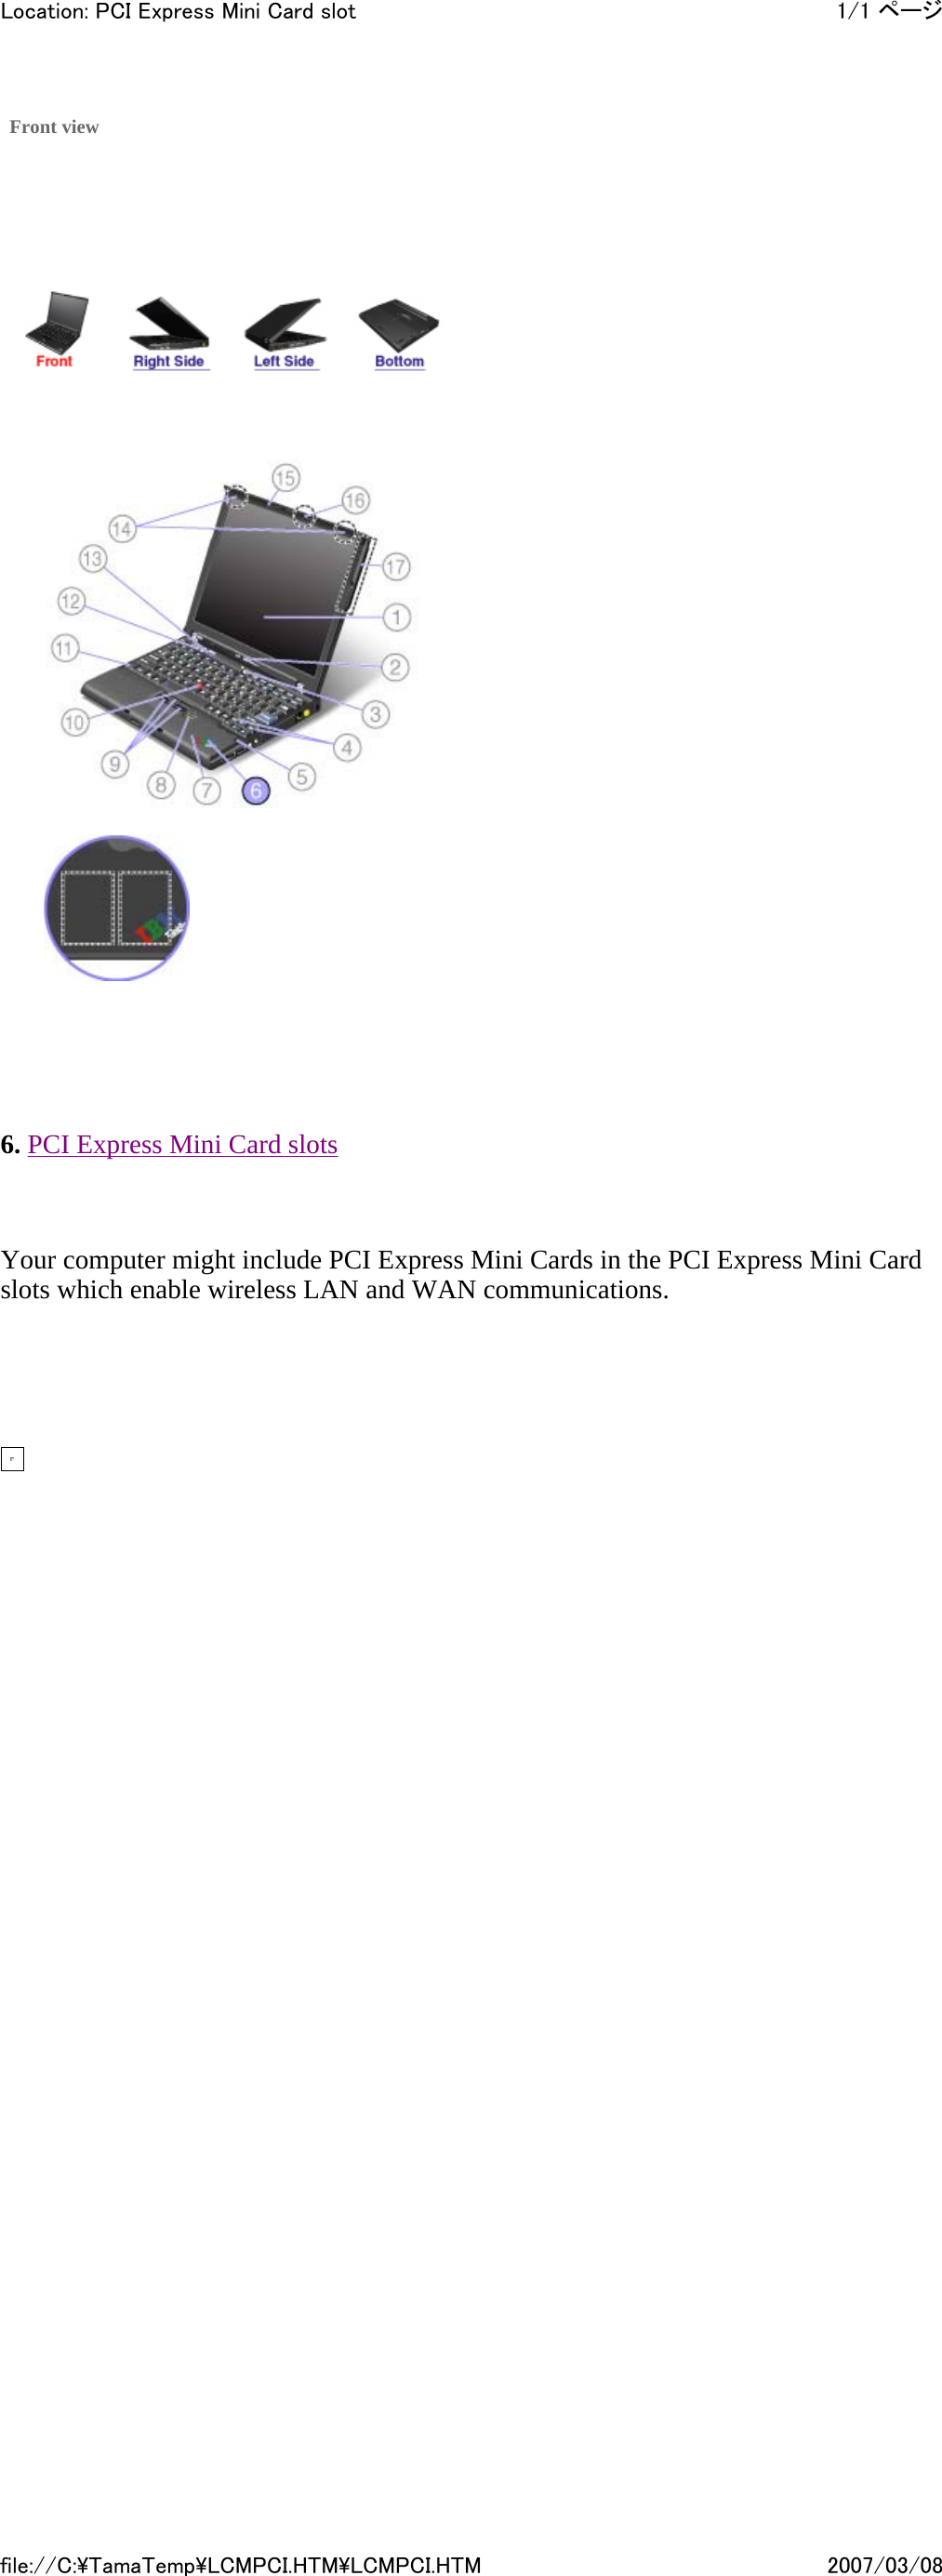             6. PCI Express Mini Card slots   Your computer might include PCI Express Mini Cards in the PCI Express Mini Card slots which enable wireless LAN and WAN communications.           Front view         1/1 ページLocation: PCI Express Mini Card slot2007/03/08file://C:\TamaTemp\LCMPCI.HTM\LCMPCI.HTM